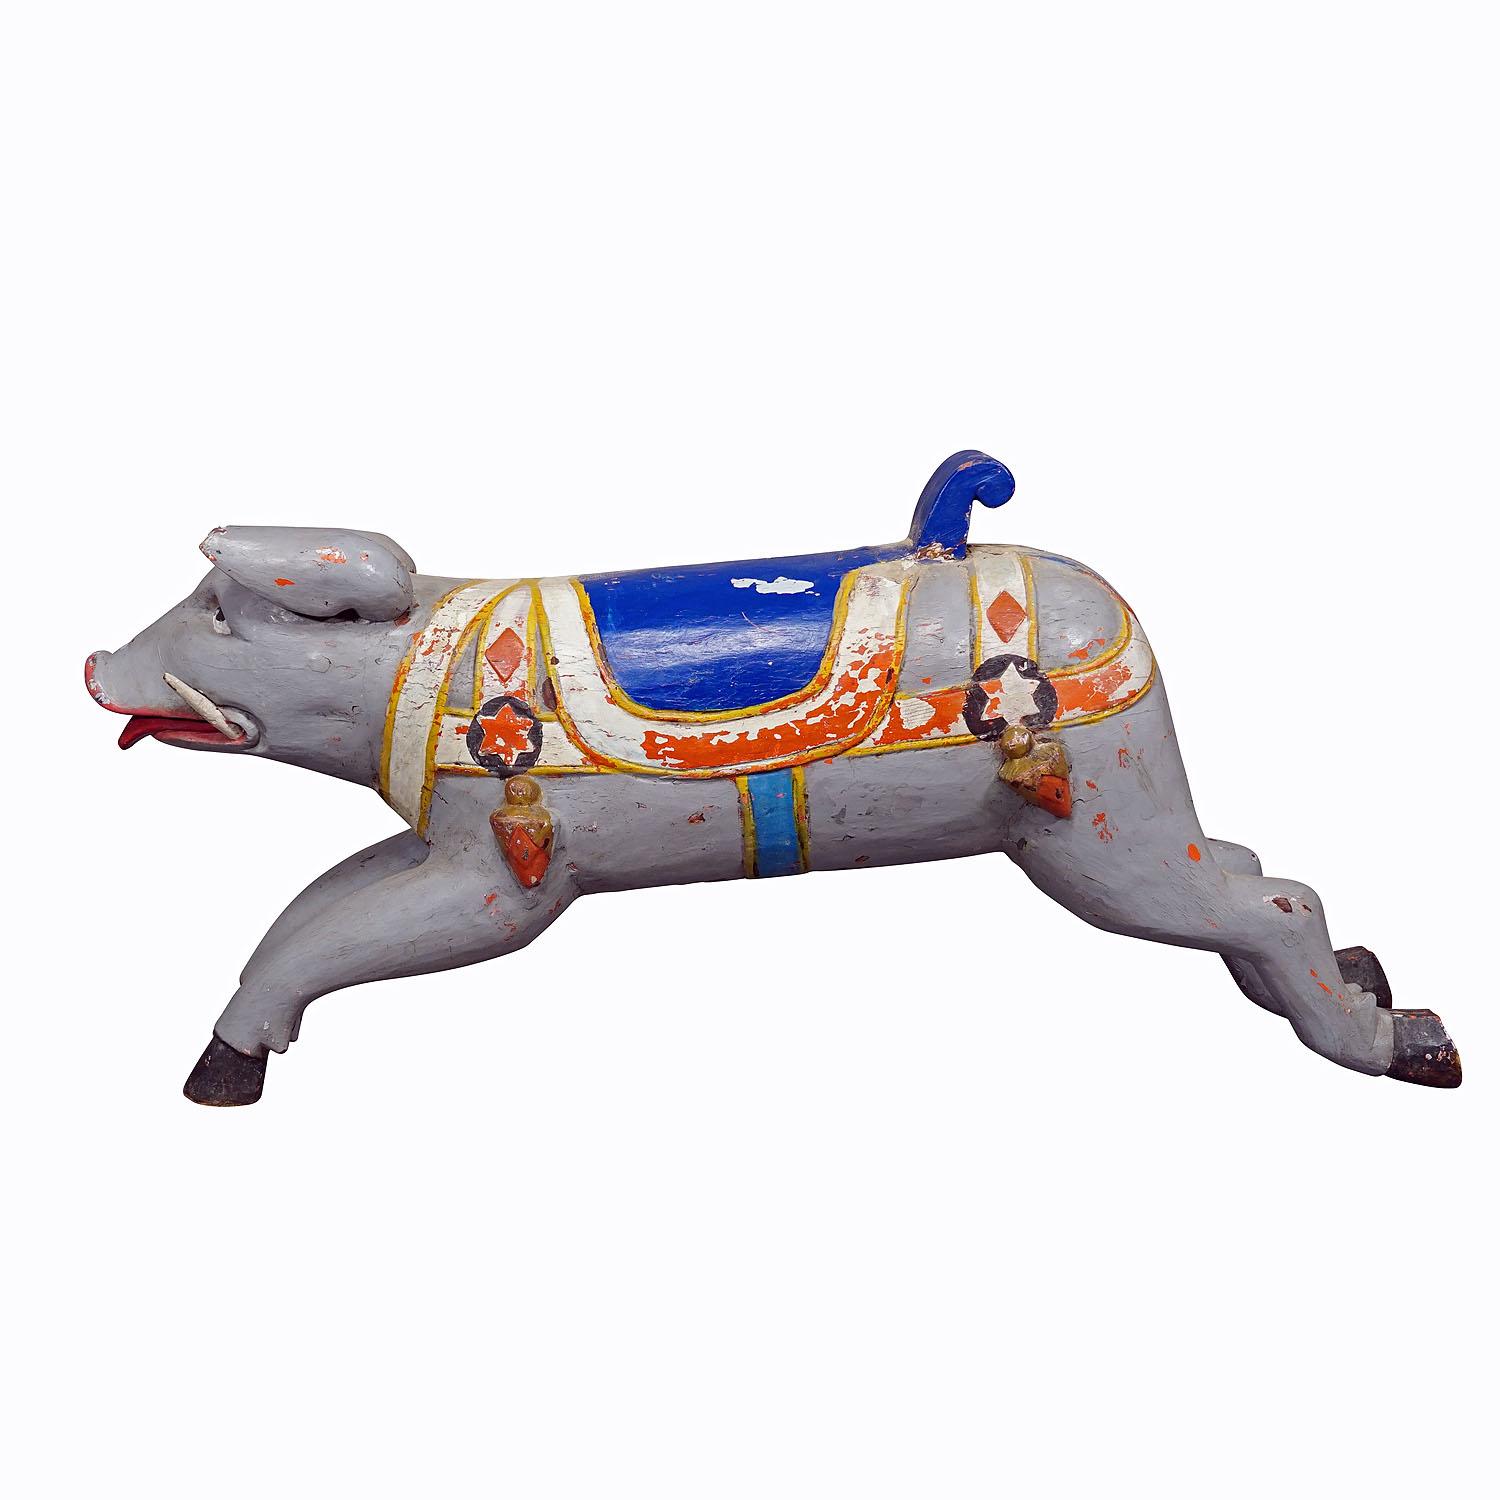 Rare Antique Children Carousel Pig, Germany ca. 1920s
Item e7291
A wooden carved children's carousel pig with polychrome painting, made in Germany around 1920. Original unrestored condition, partially repainted, traces of use according to the old